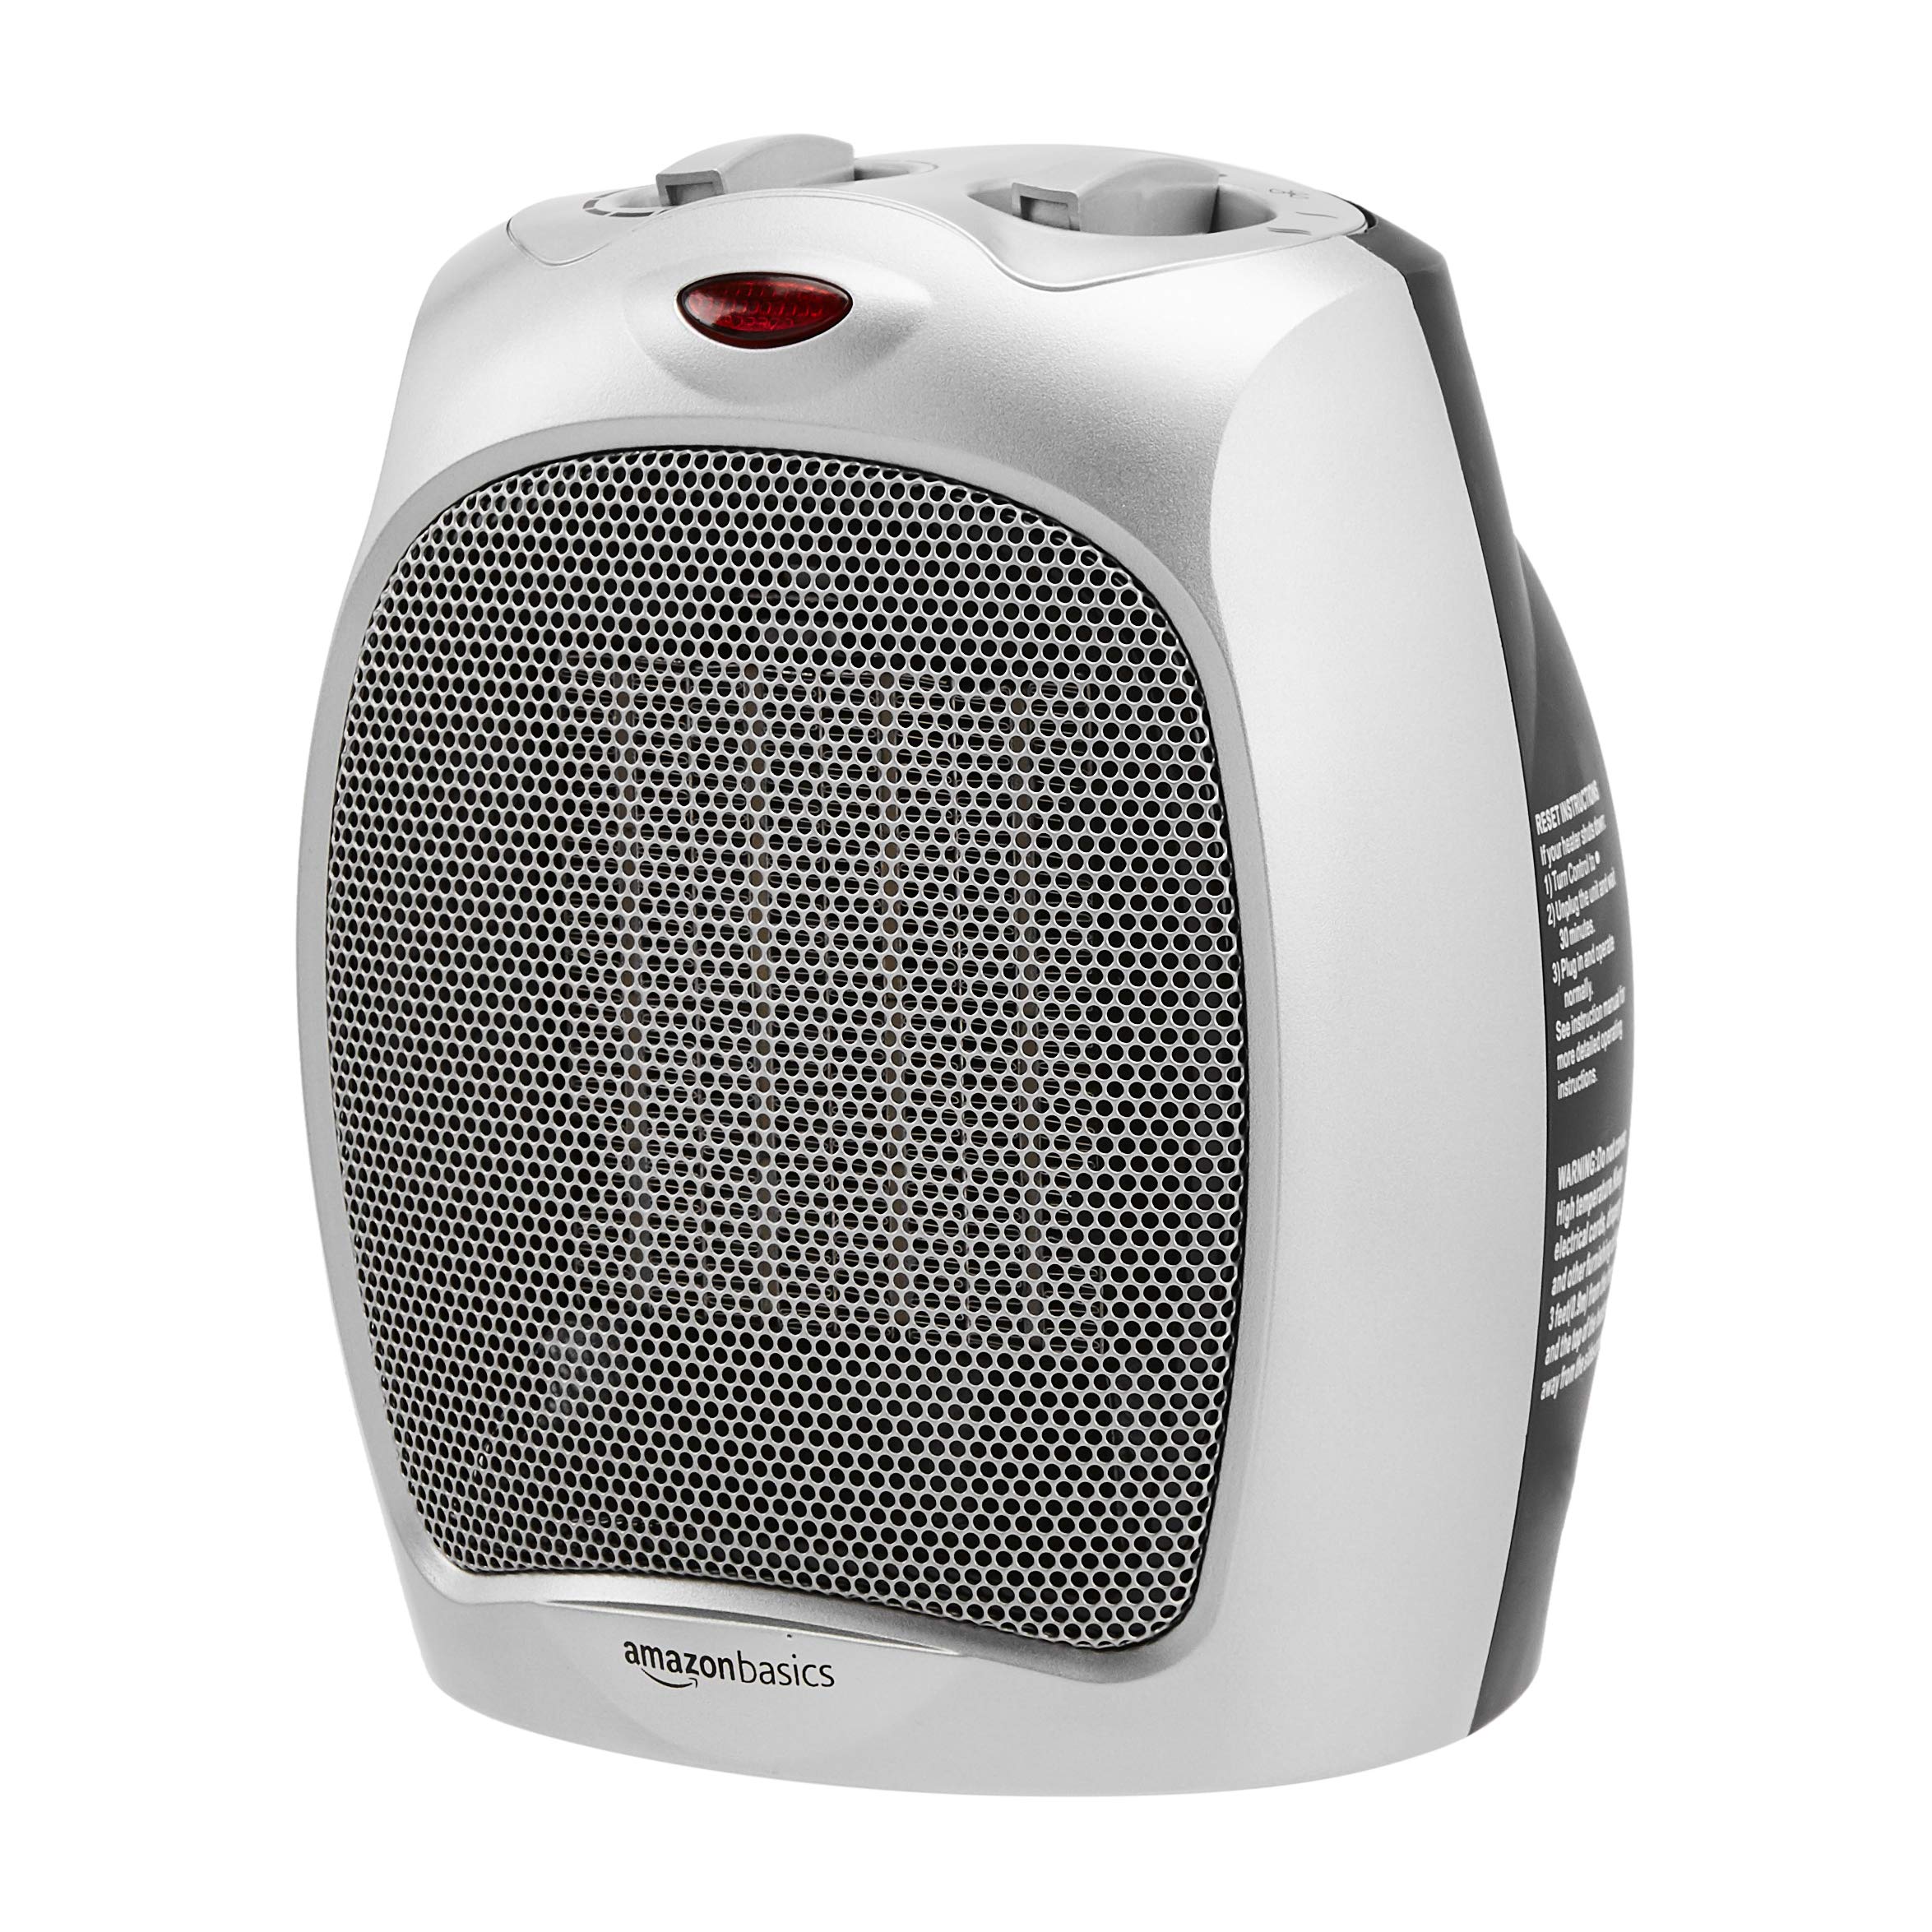 Amazon Basics 1500W Ceramic Personal Heater with Adjustable Thermostat, Silver - $21.40